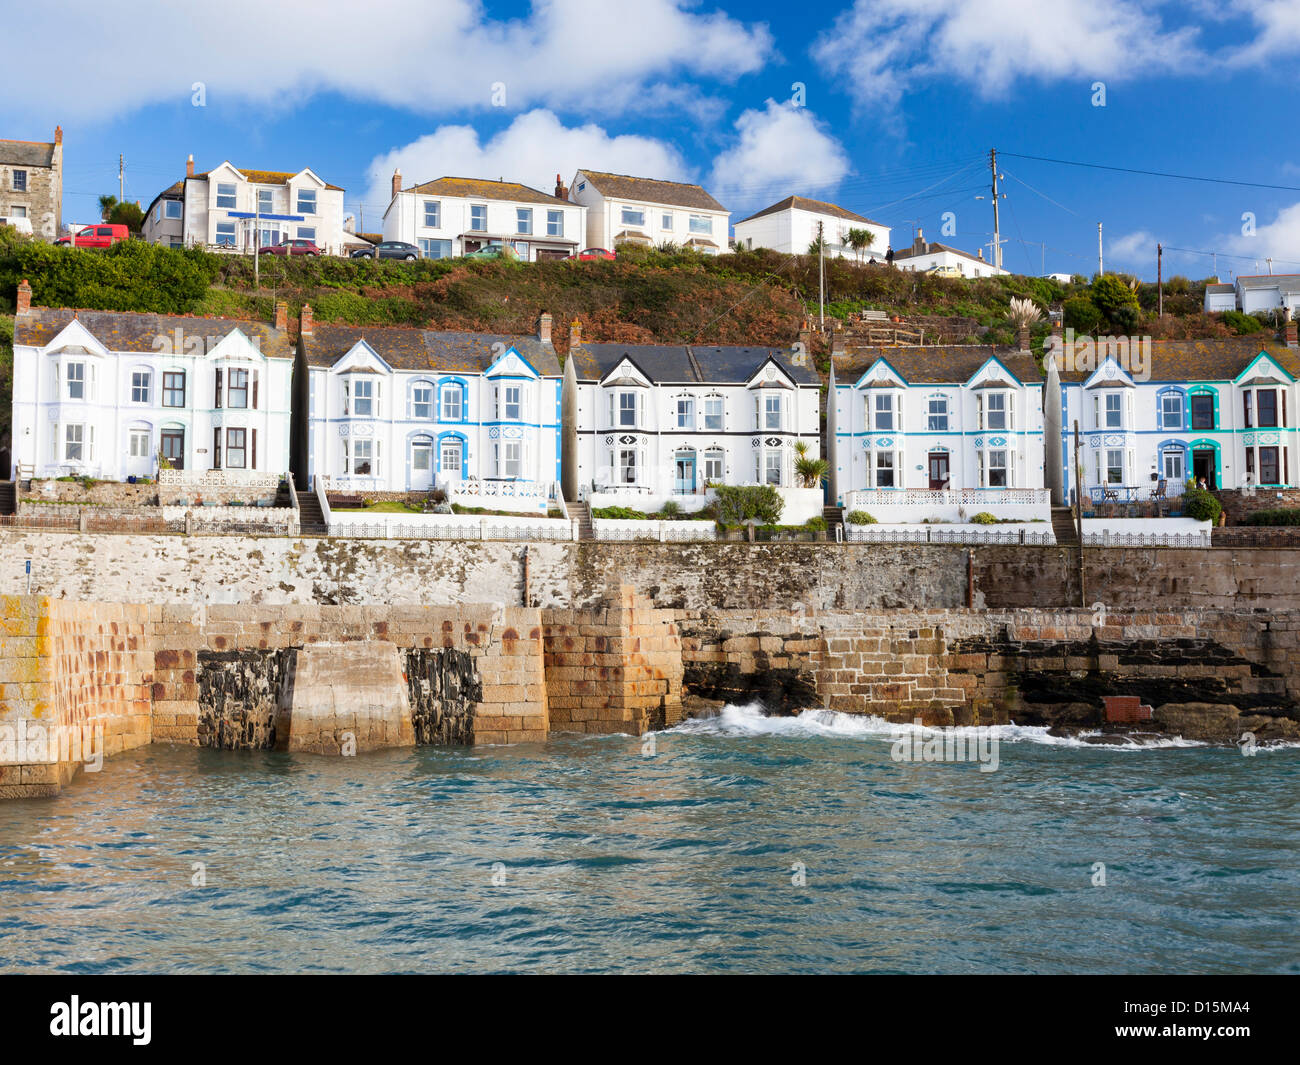 Row Of Seaside Houses At Porthleven Cornwall England Uk Stock